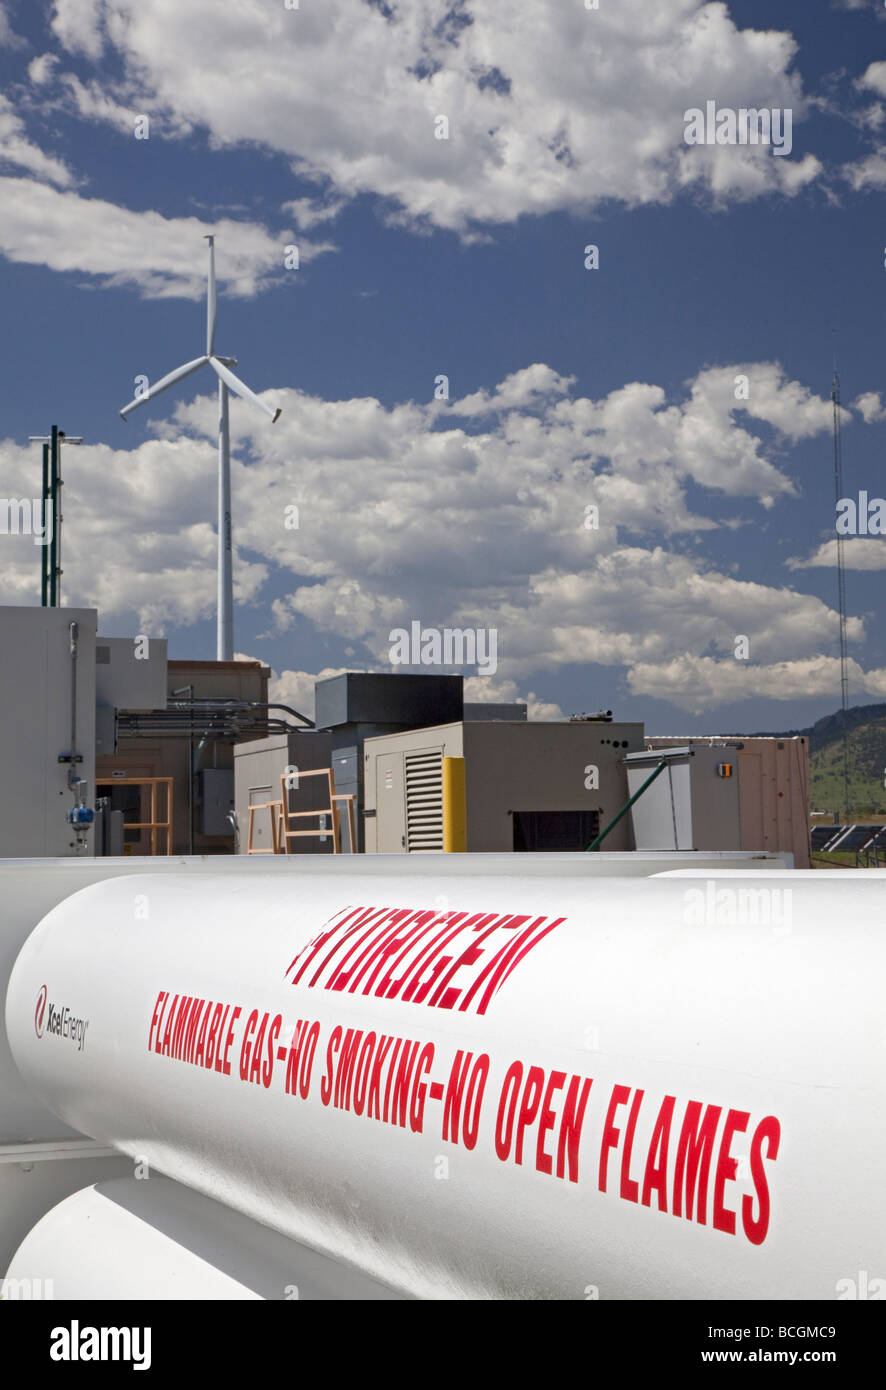 Wind energy is converted to hydrogen at the National Renewable Energy Laboratory's Wind Technology Center. Stock Photo